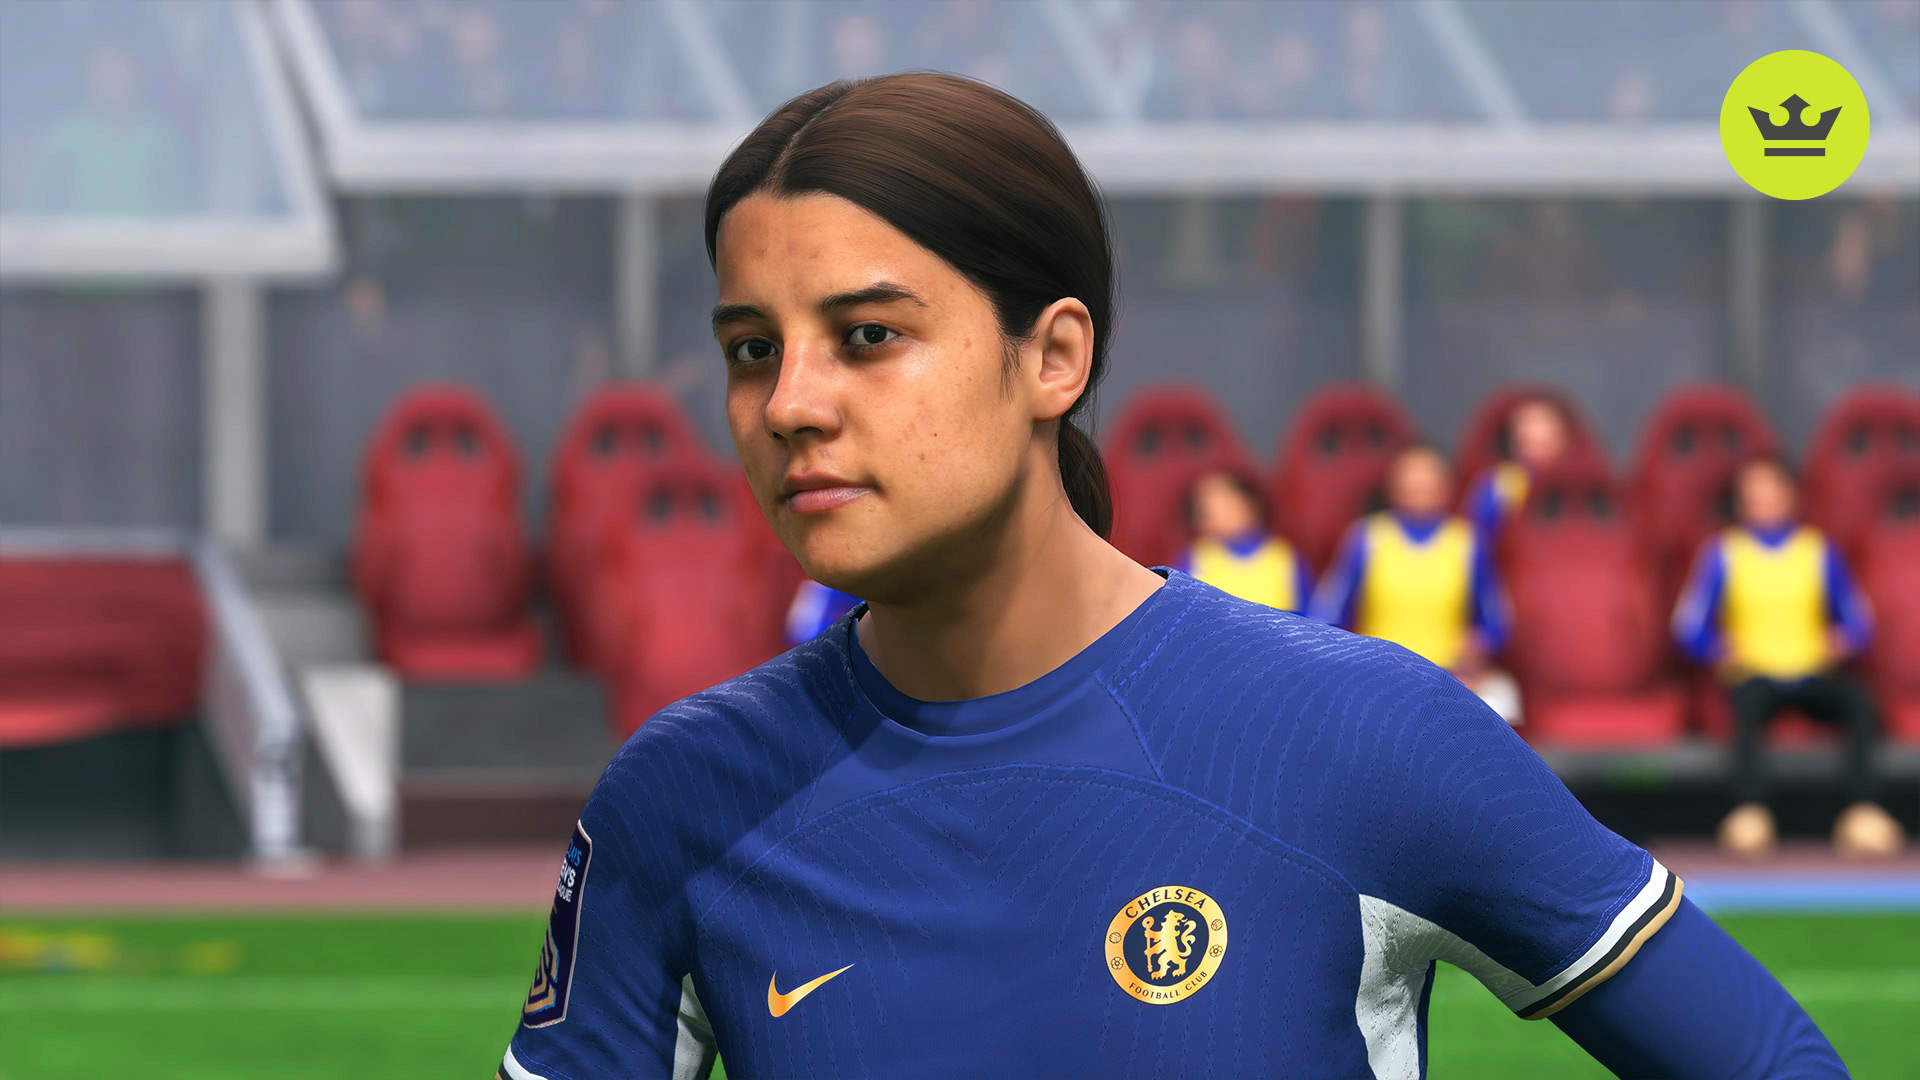 EA FC 24 loot boxes could see changes as UK body cracks down on